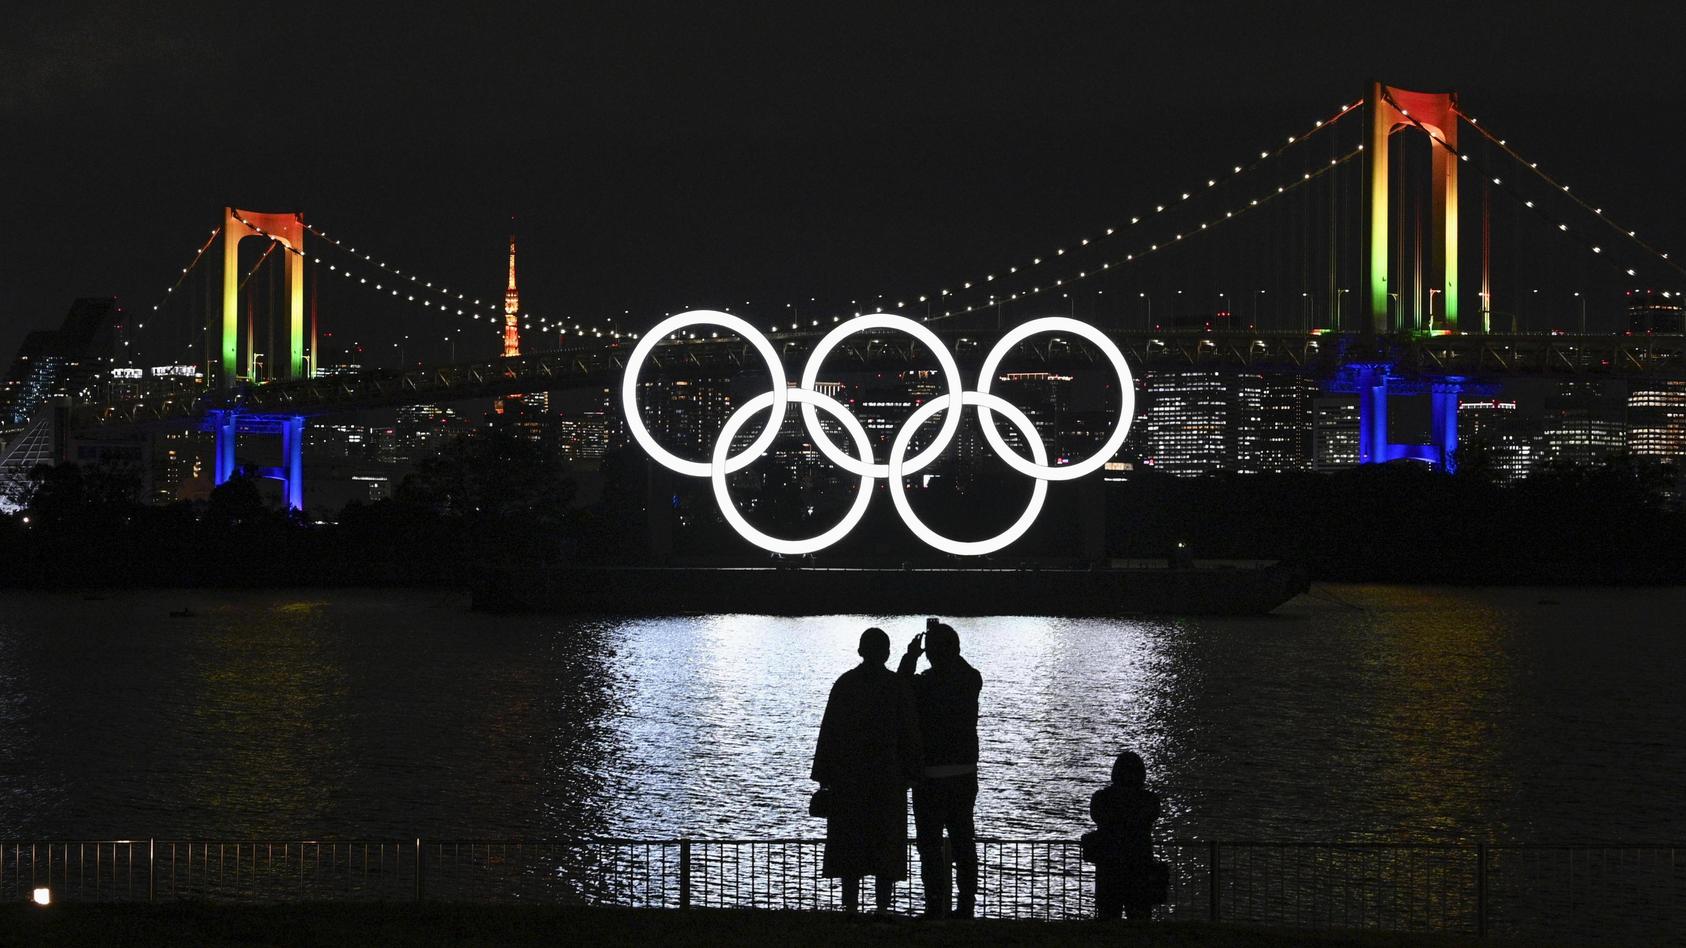 Sport Themen der Woche KW49  Reinstallation of Olympic rings in Tokyo Bay The Olympic rings glow in the dark after being reinstalled in Tokyo Bay off Odaiba Marine Park on Dec. 1, 2020, after they underwent a safety inspection and maintenance. The ri